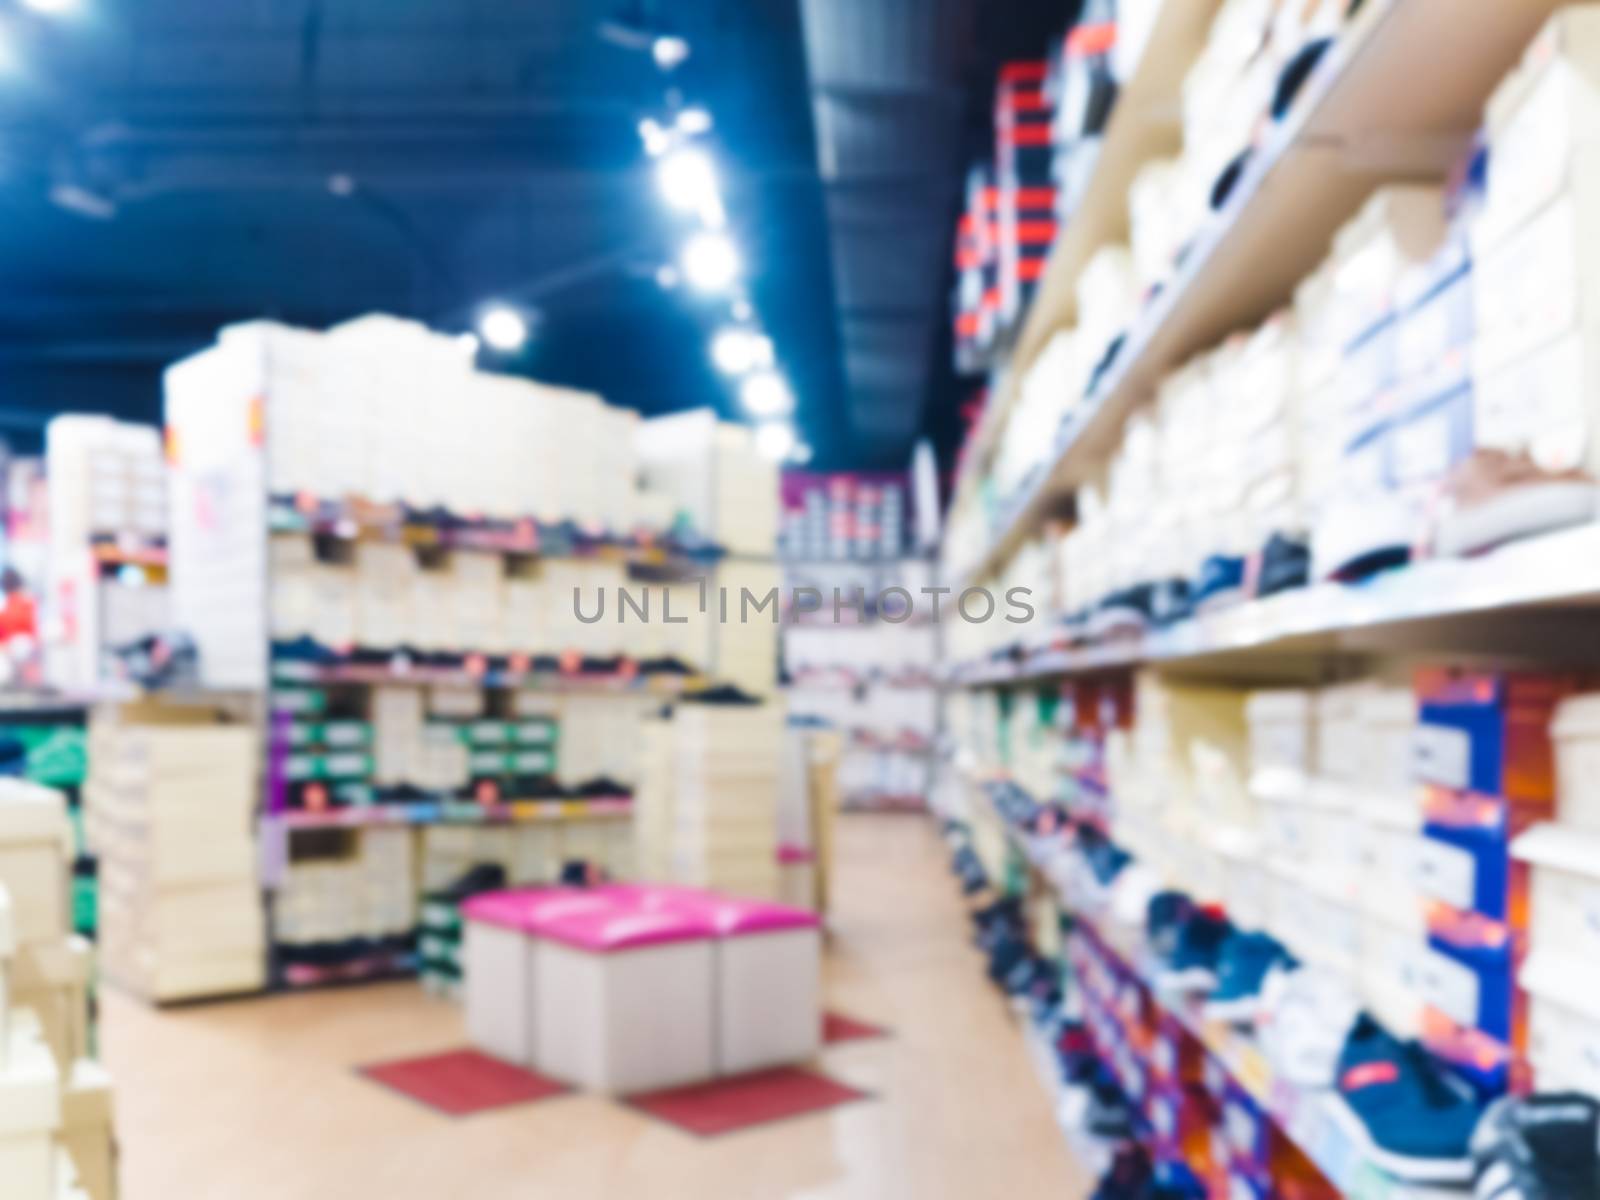 Blur image of shoes and accessories store interior as background